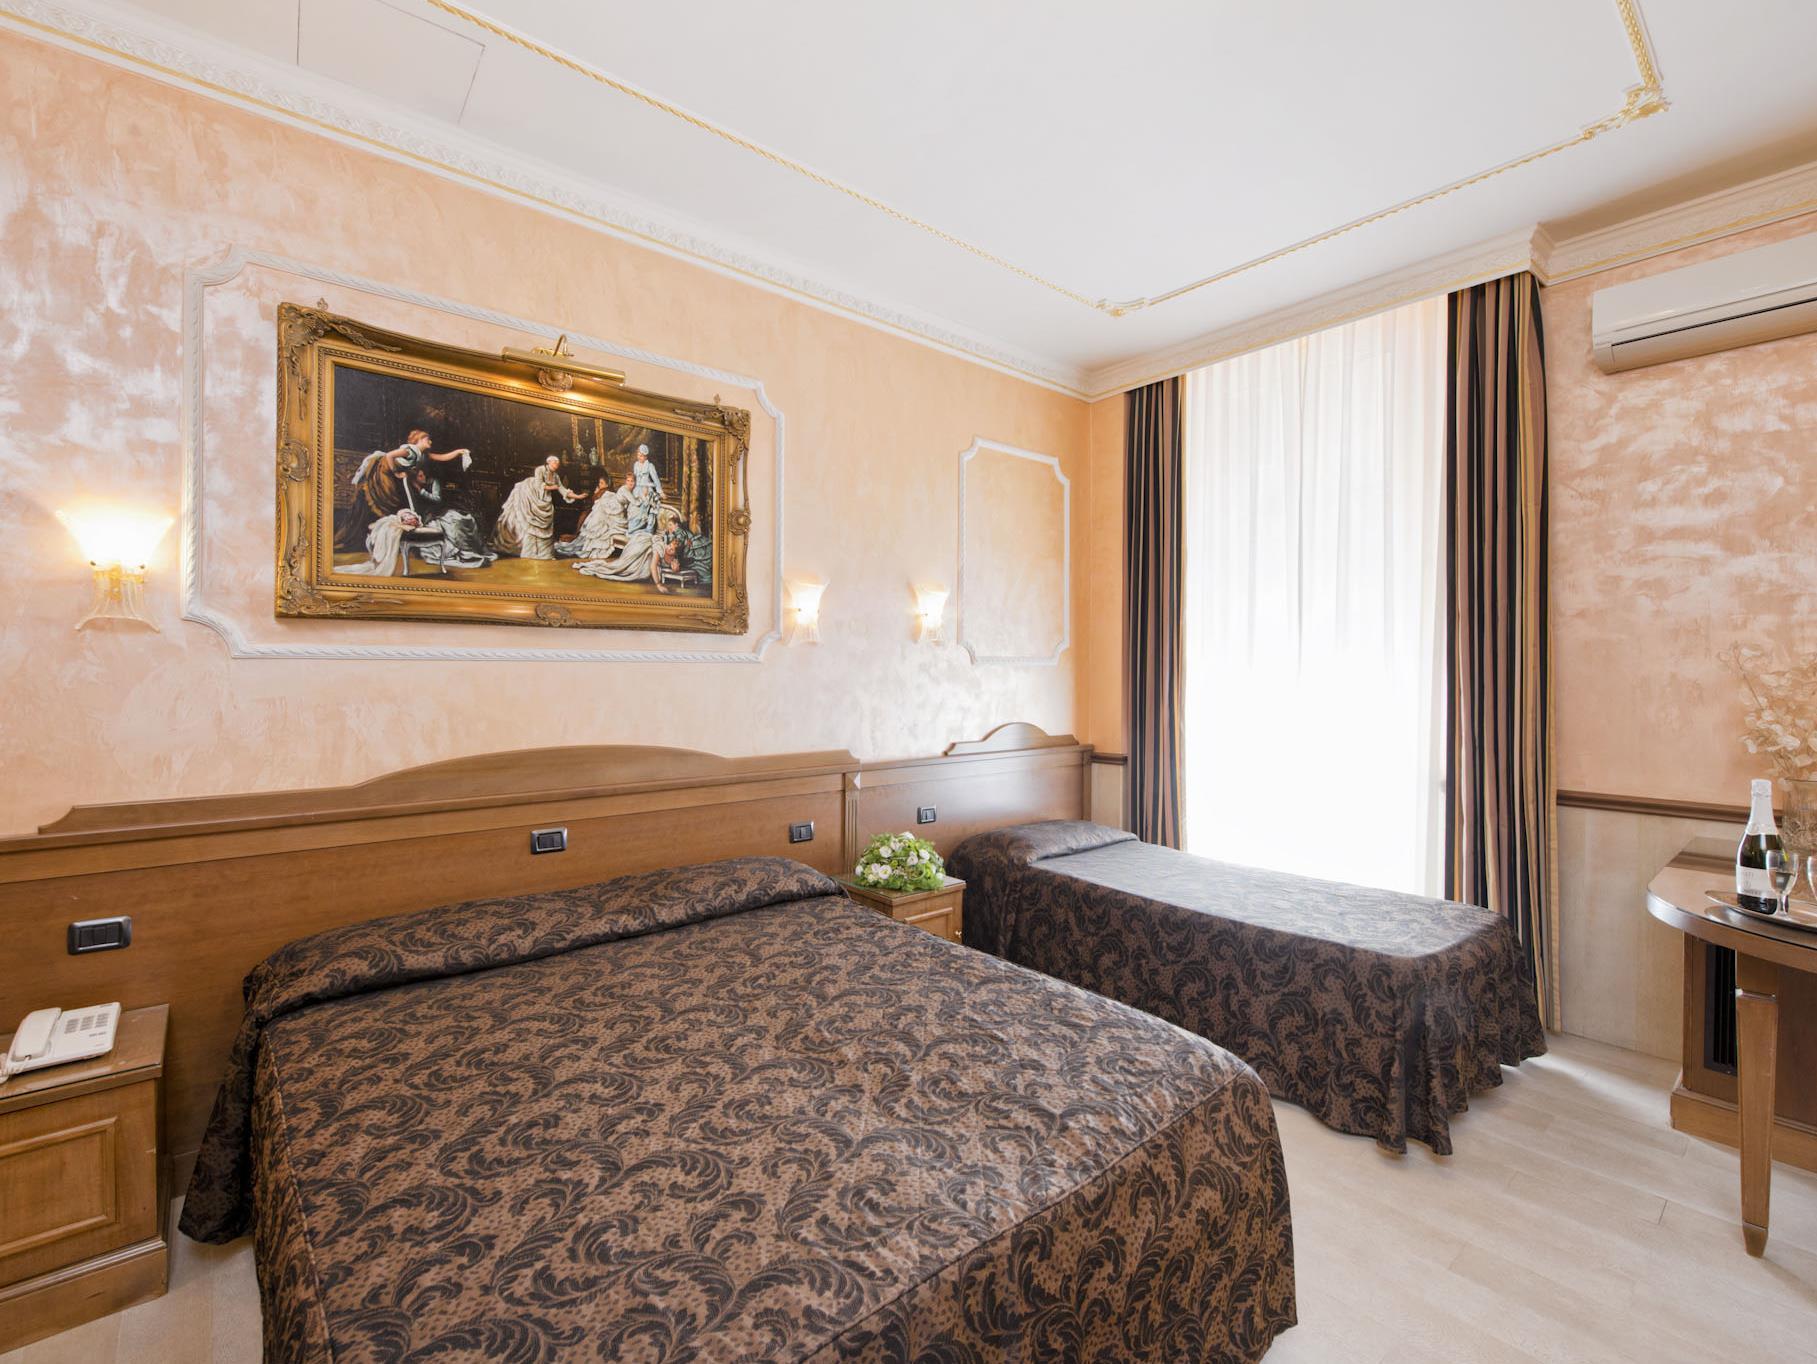 Marco Polo Hotel Rome-Rome Updated 2023 Room Price-Reviews & Deals |  Trip.com